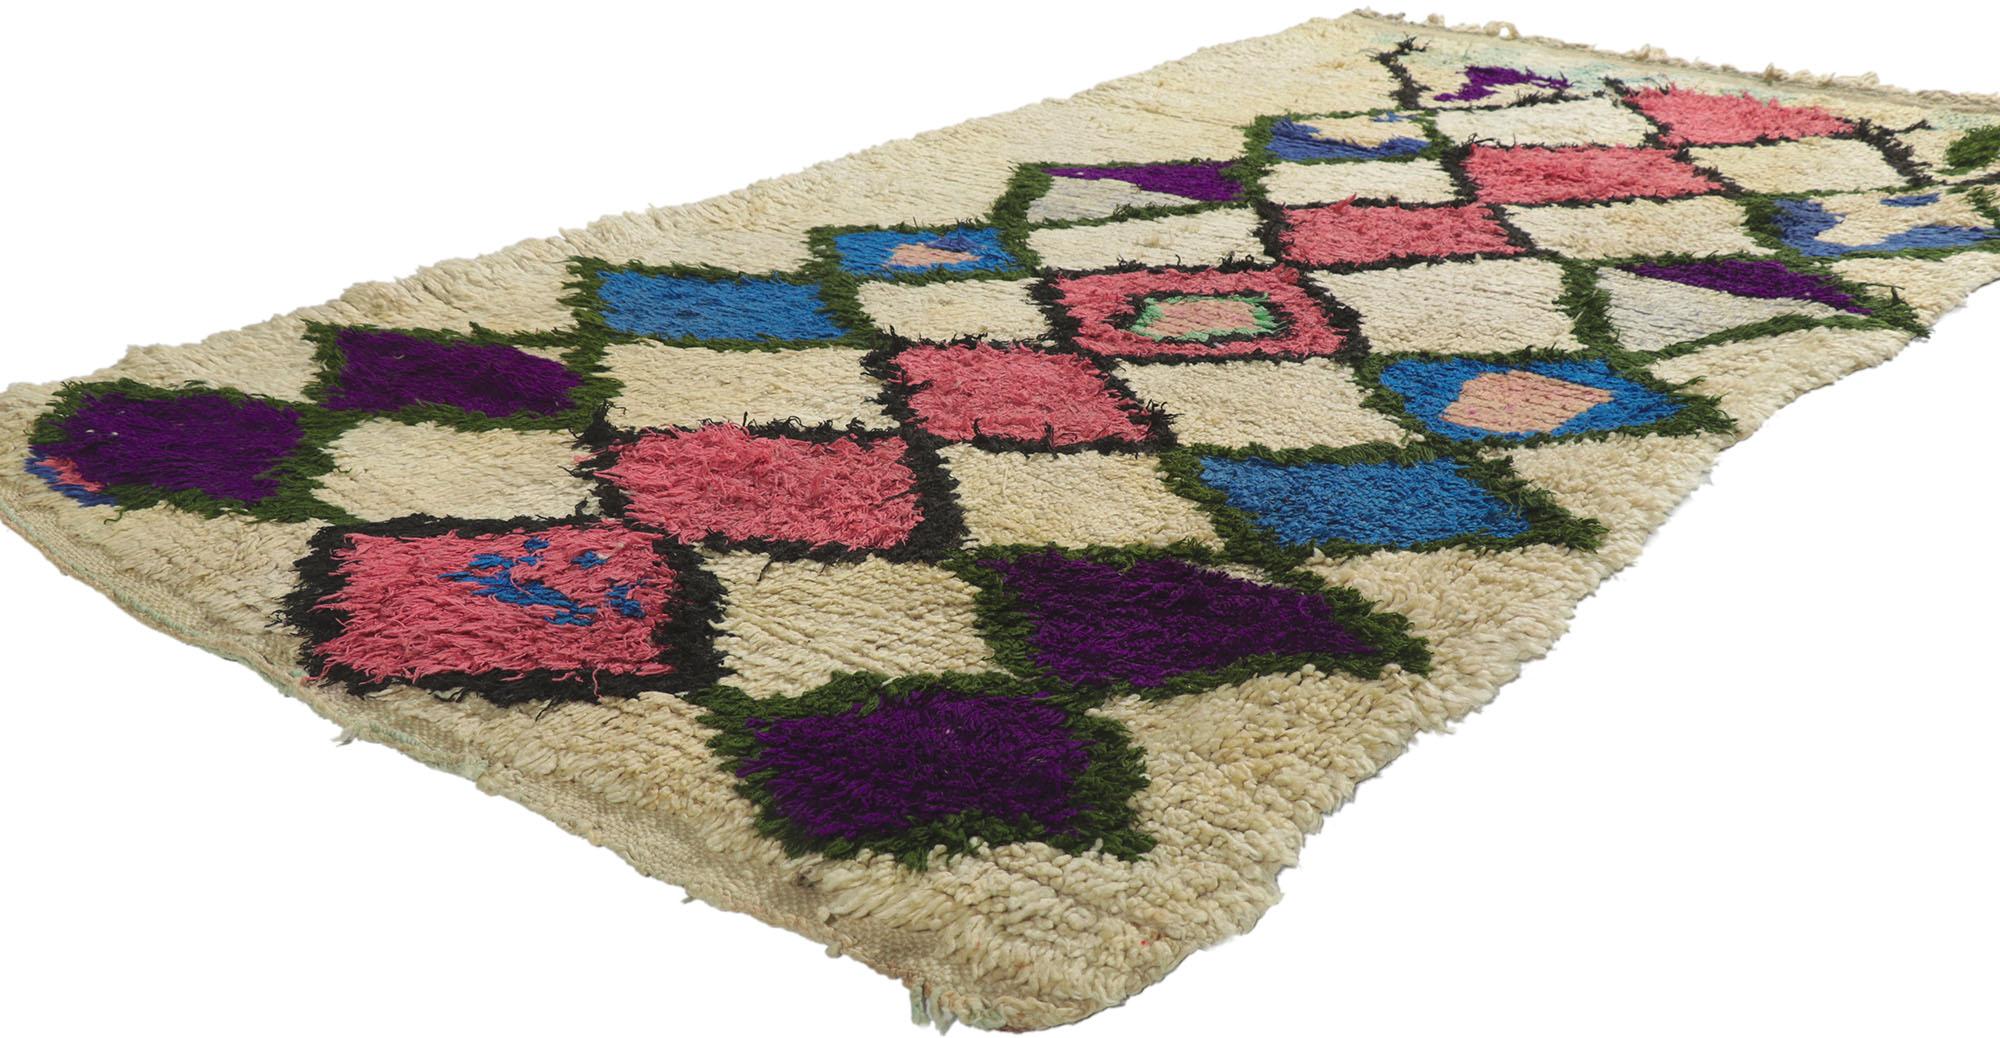 21629 Vintage Berber Moroccan Azilal Rug, 03'09 x 03'06. With its simplicity, bohemian style, incredible detail and texture, this hand knotted wool vintage Berber Moroccan Azilal rug is a captivating vision of woven beauty. The abrashed field